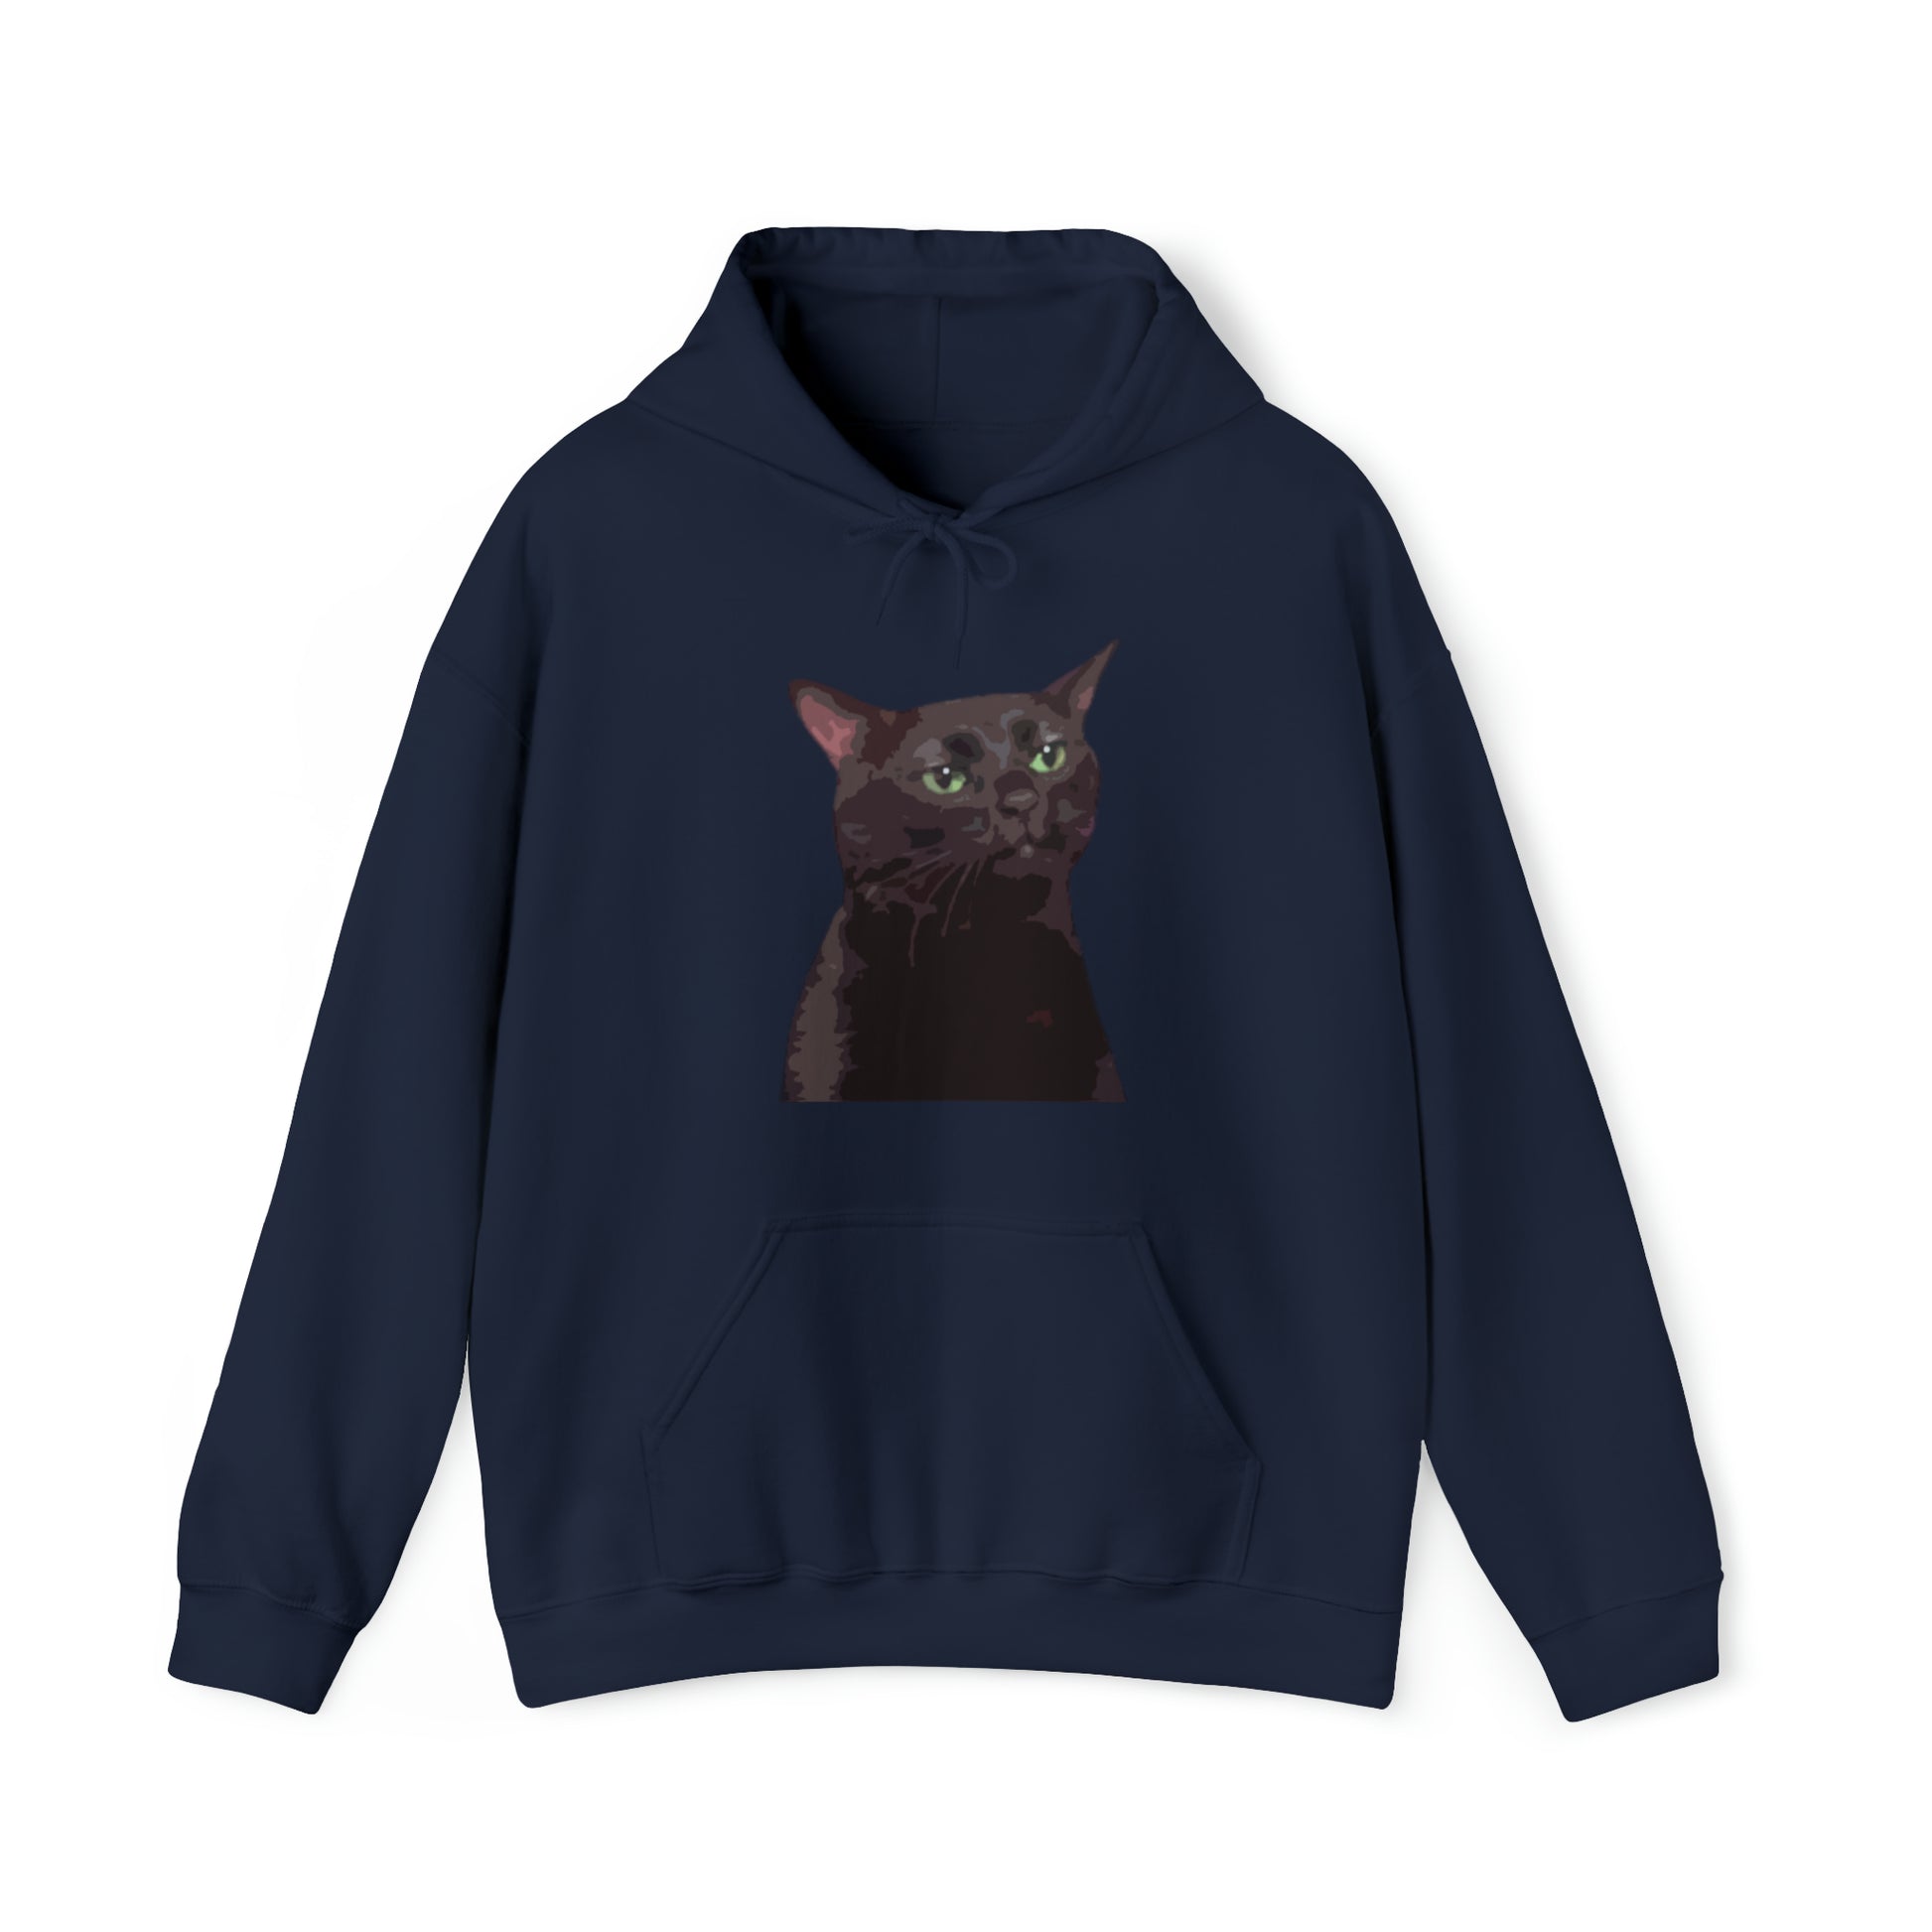 S Navy Black Cat Zoning Out Hoodie from HoodySZN.com